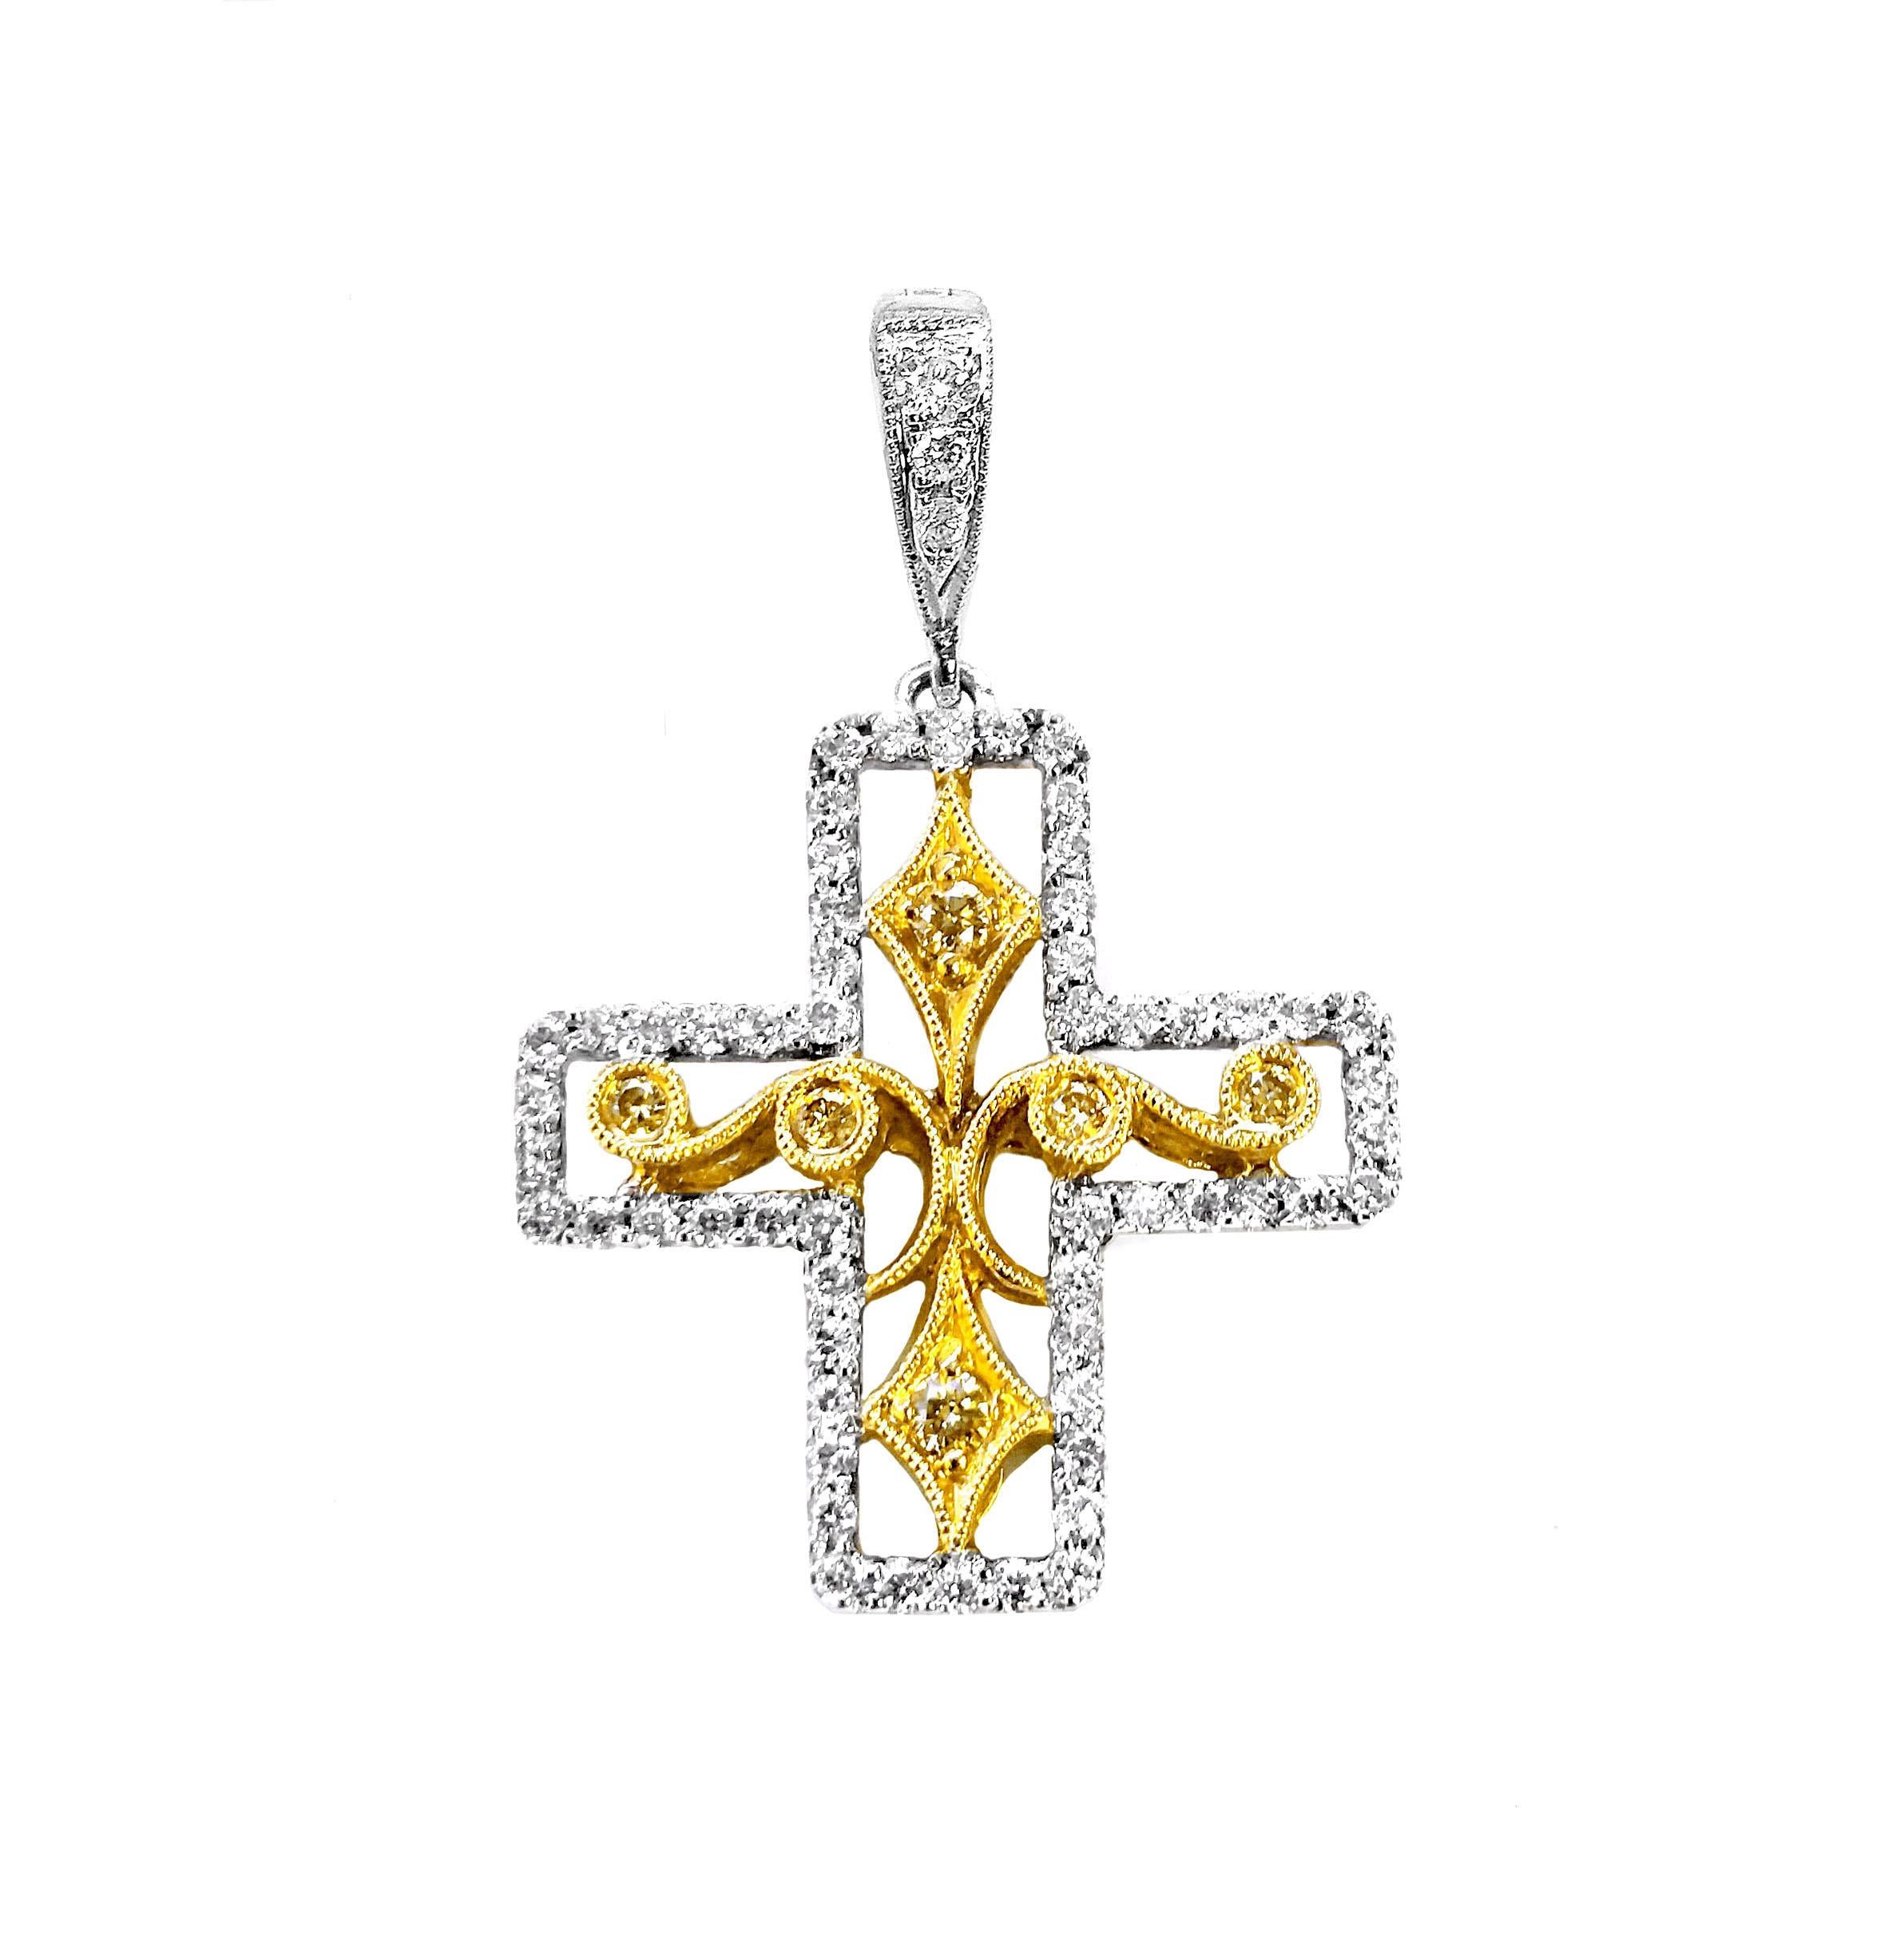 Produced by award winning Italian designer Stefano Vitolo. Stefano creates custom artisanal one of a kind jewelry with excellent gemstones in a truly old world Italian craftmanship.

Gemstones: Yellow Diamonds 0.07 ctw , White Diamonds 0.24